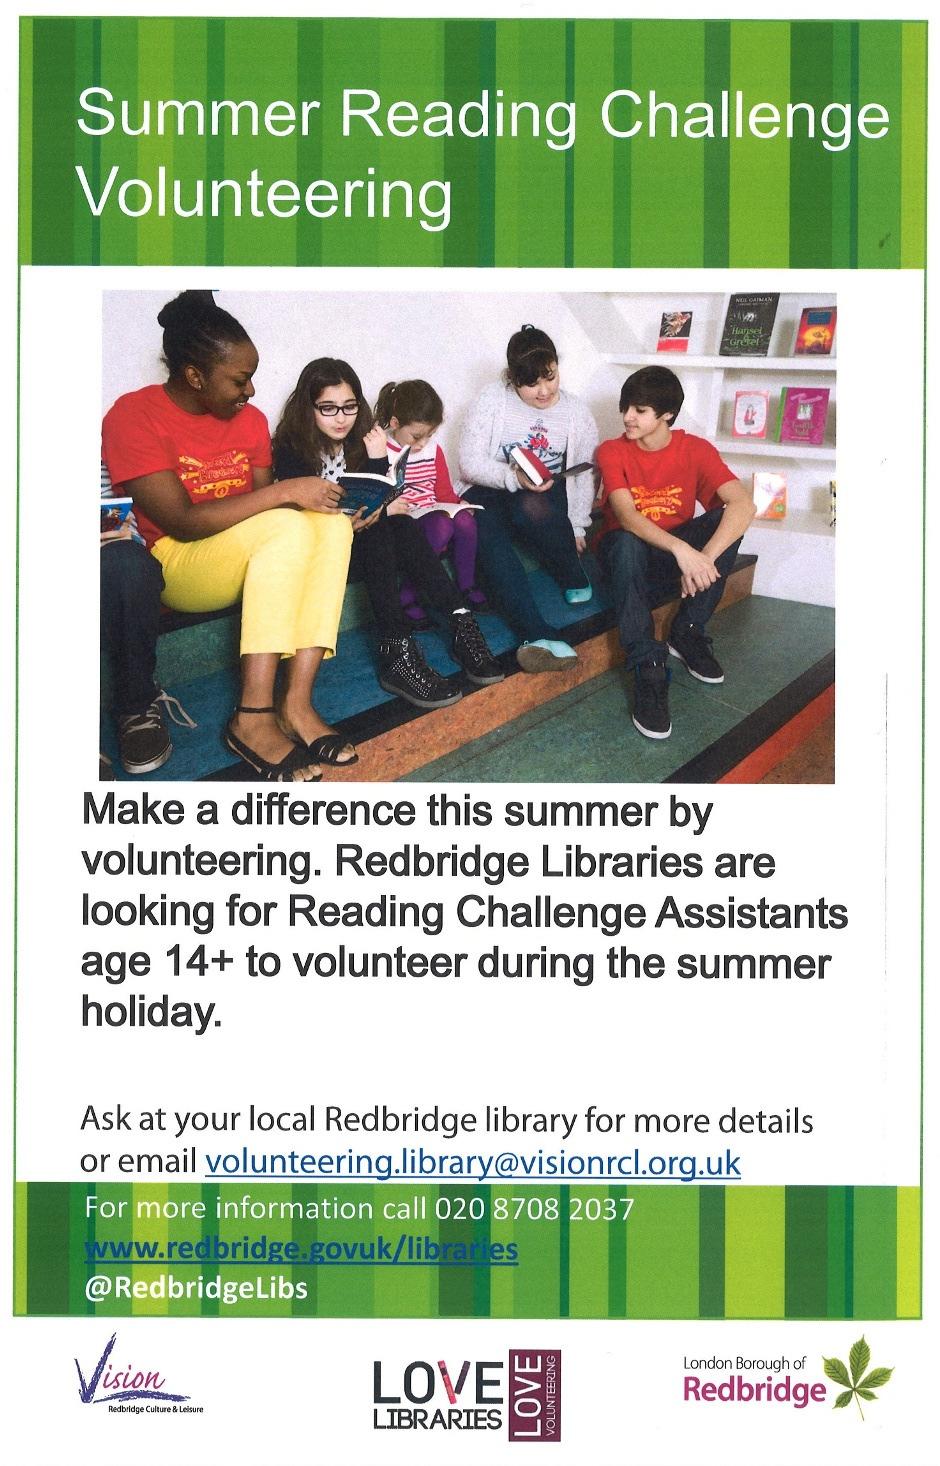 I am writing to remind you that Redbridge Libraries are currently offering excellent opportunities for young people to gain skills and experience by volunteering during the summer holiday period.